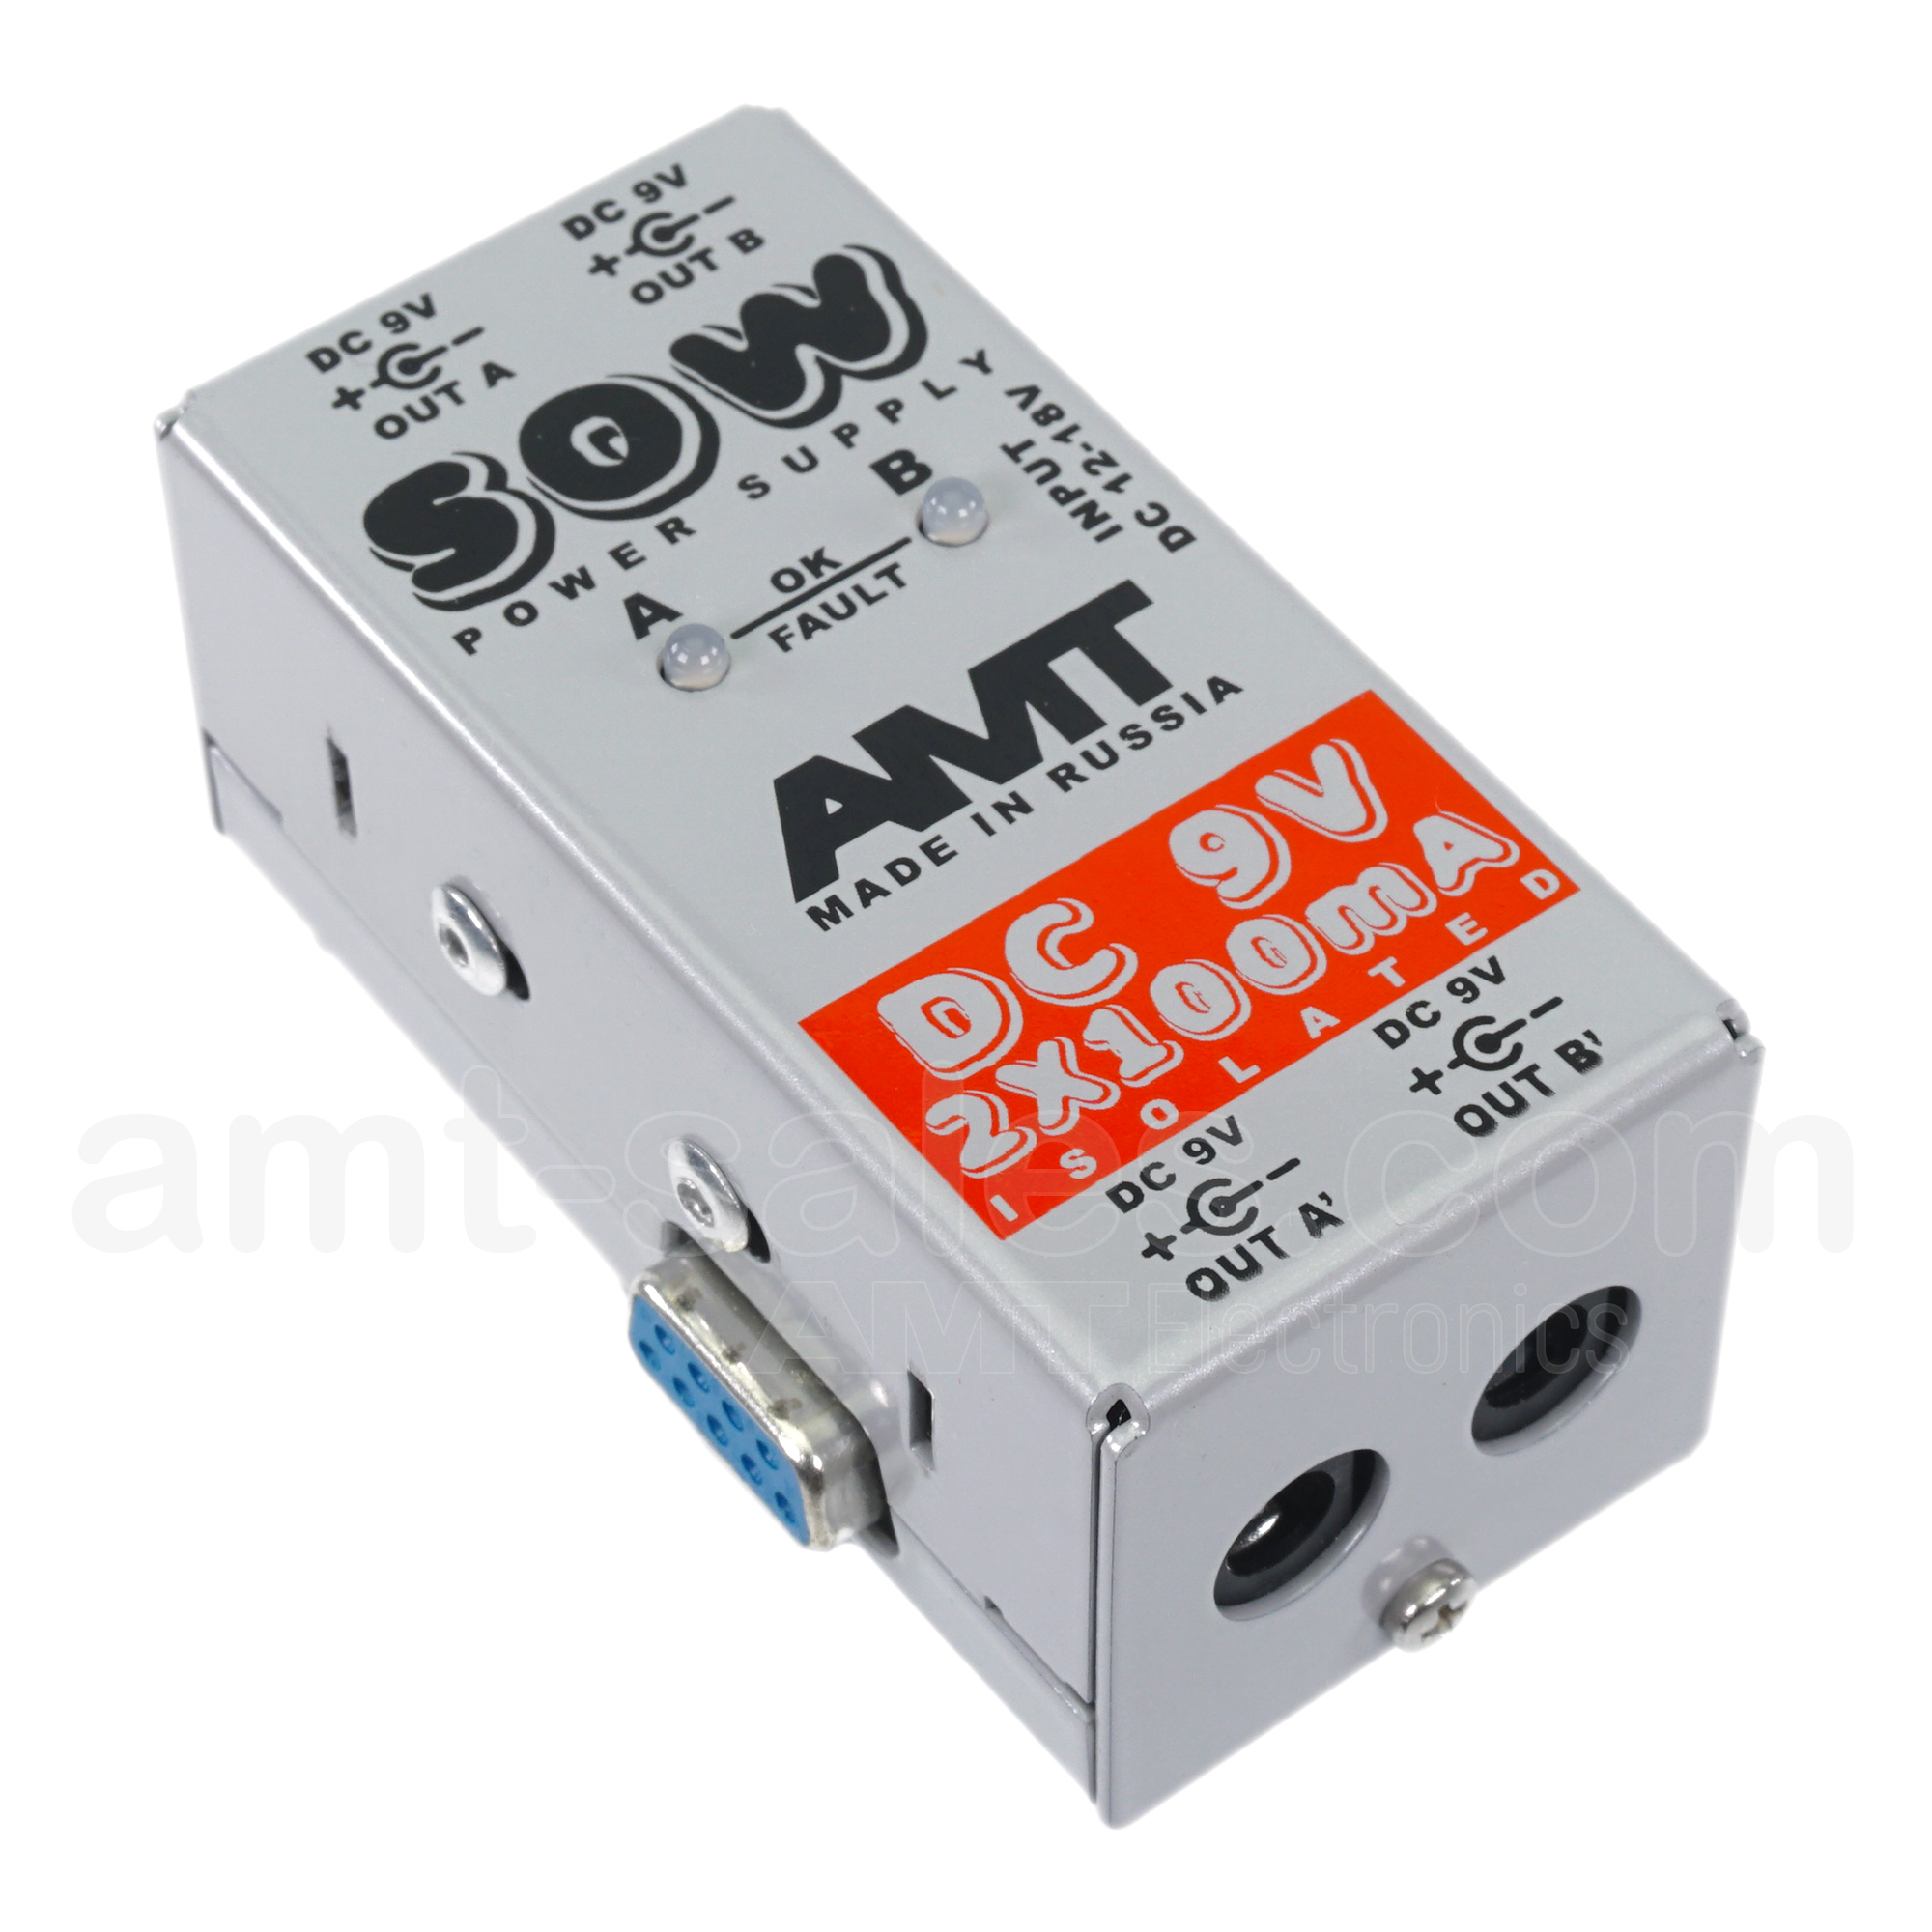 AMT SOW PS-2 DC-9V 2x100mA - power supply module